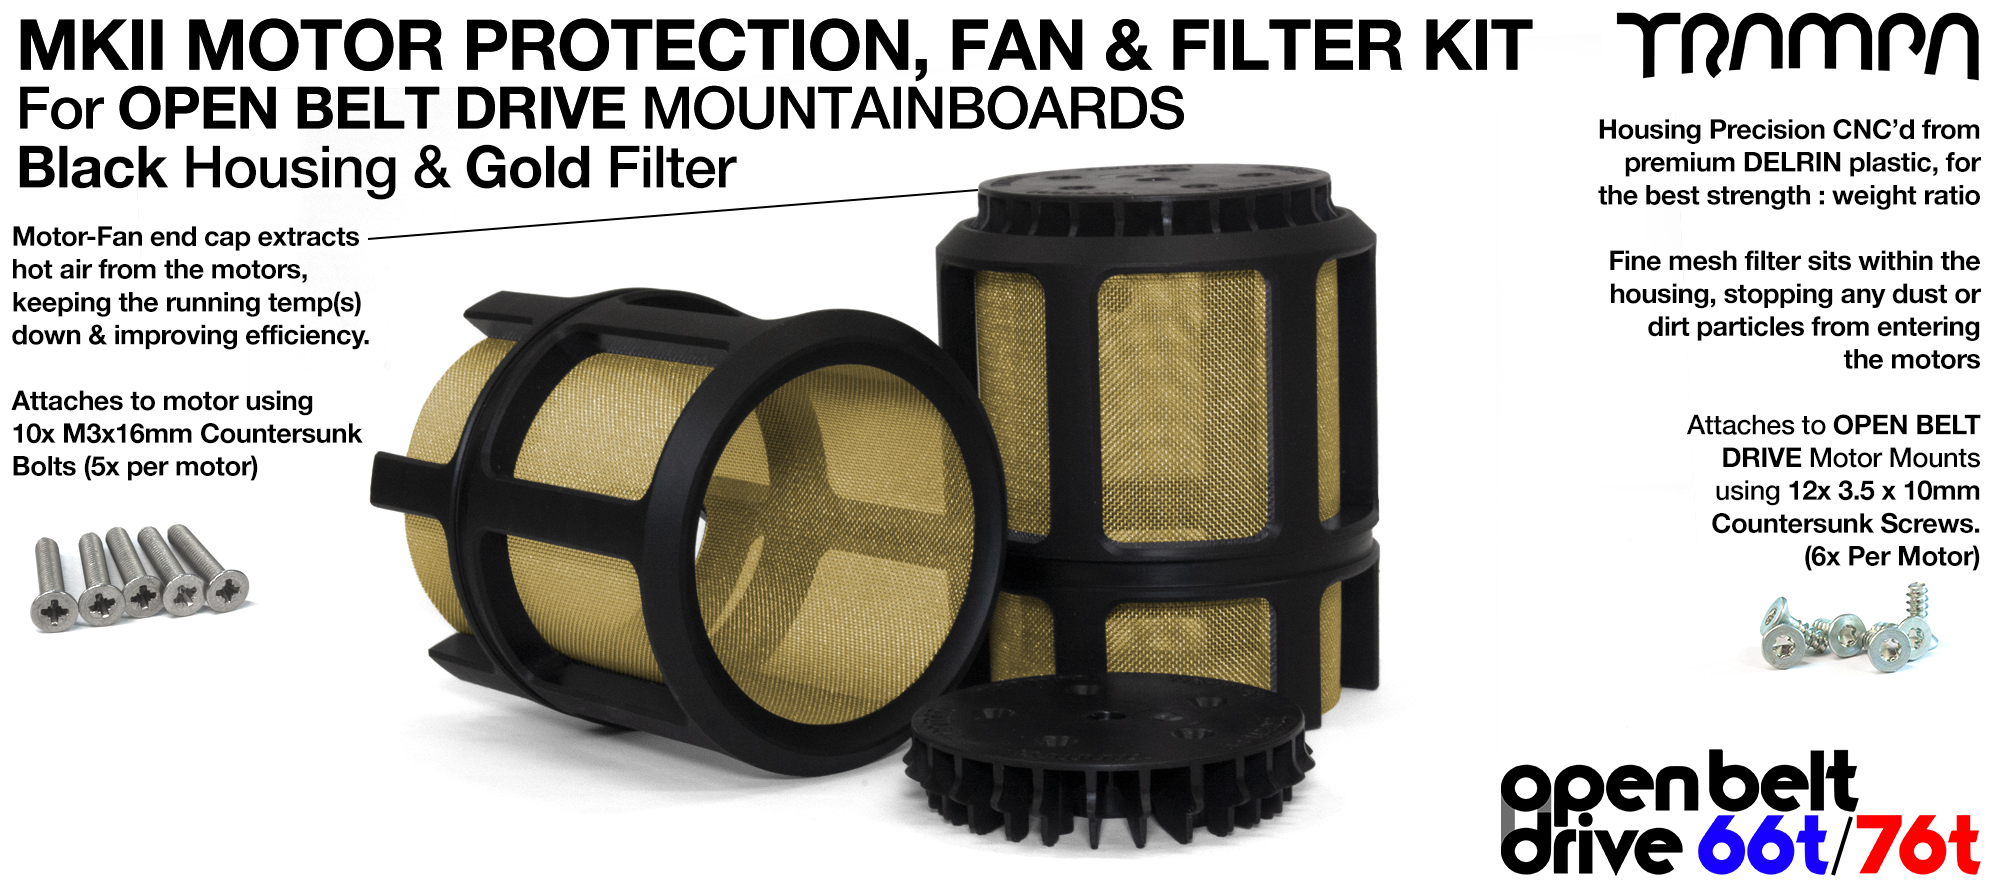 FULL CAGE Motor protection SUPER STRONG DELRIN Plastic includes Fan & GOLD Filter - TWIN